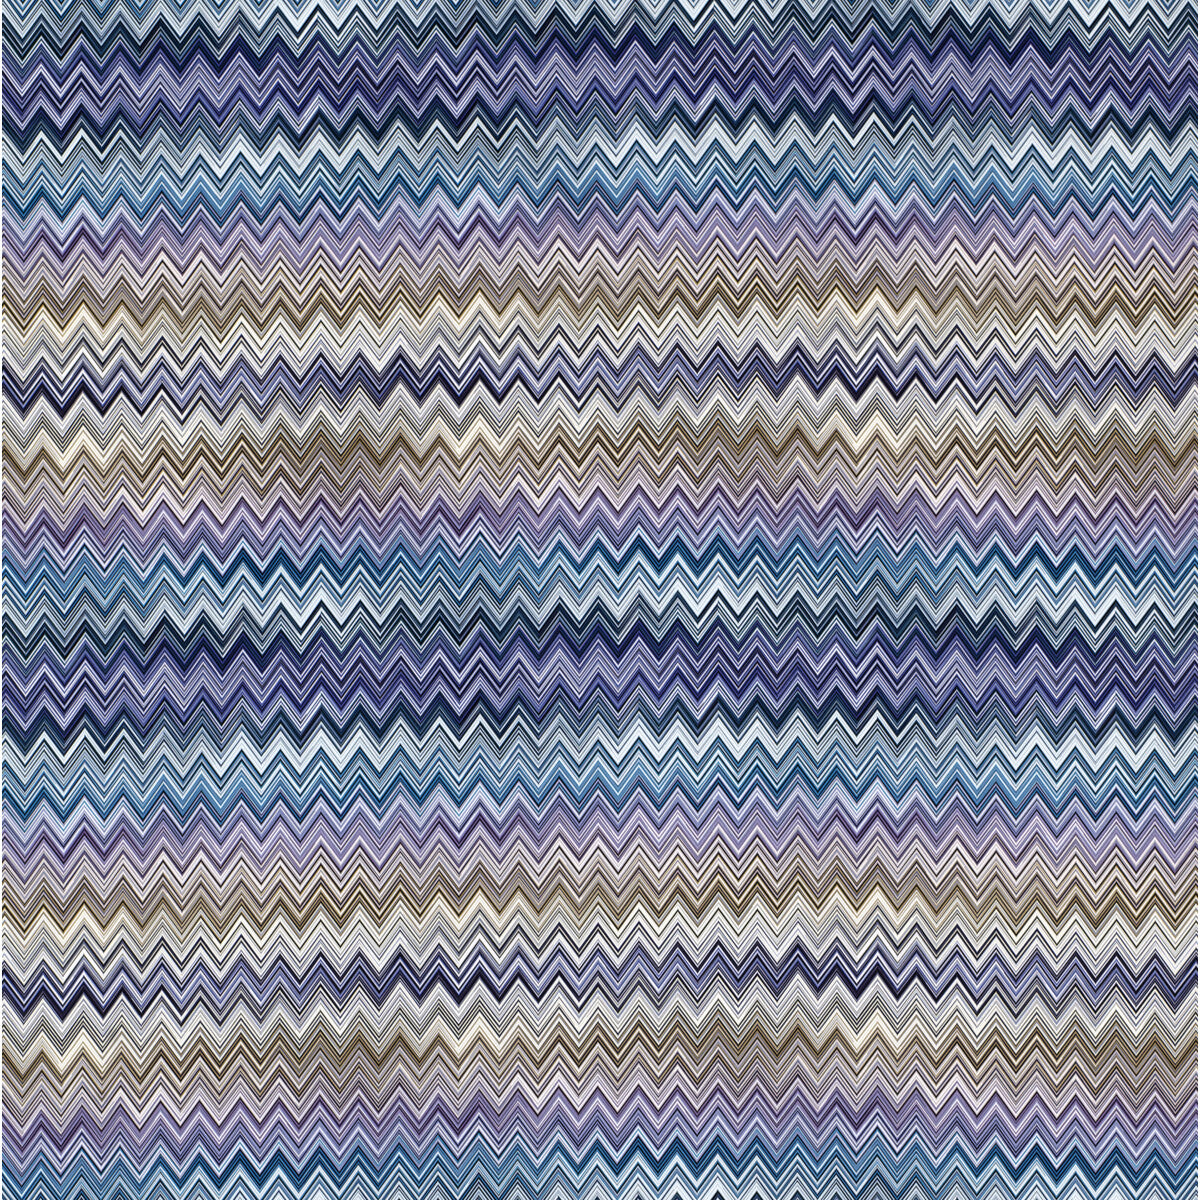 Jarris fabric in 150 color - pattern 36162.510.0 - by Kravet Couture in the Missoni Home collection